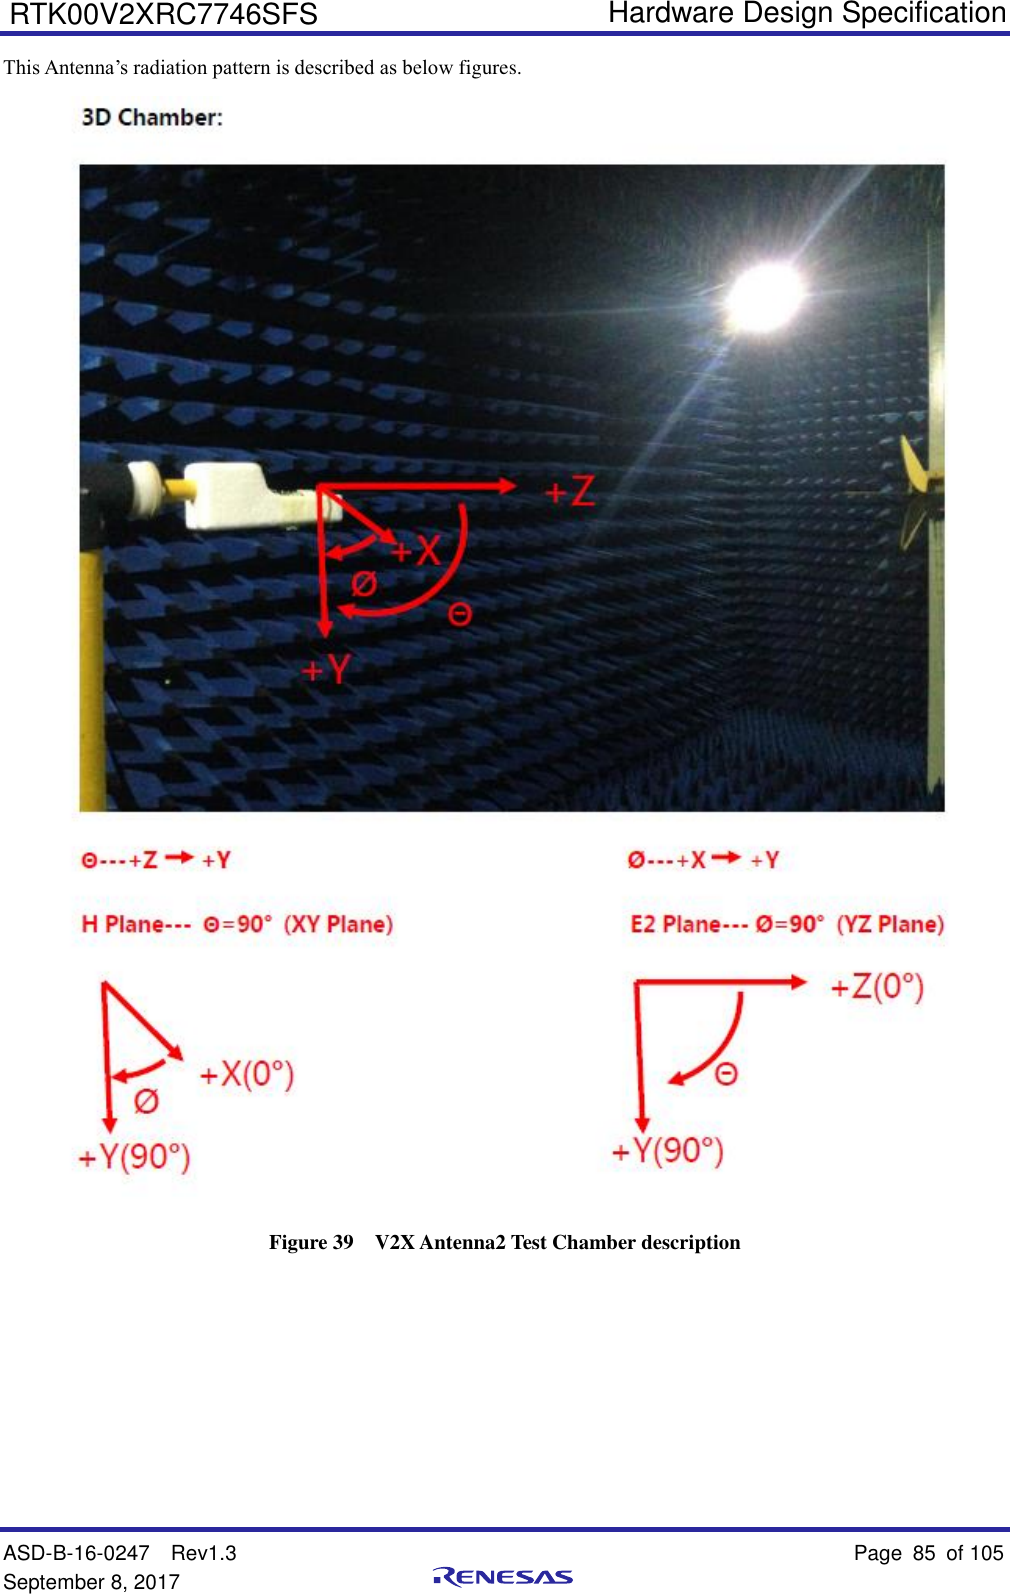   Hardware Design Specification ASD-B-16-0247  Rev1.3    Page 85  of 105 September 8, 2017      RTK00V2XRC7746SFS This Antenna’s radiation pattern is described as below figures.  Figure 39  V2X Antenna2 Test Chamber description       